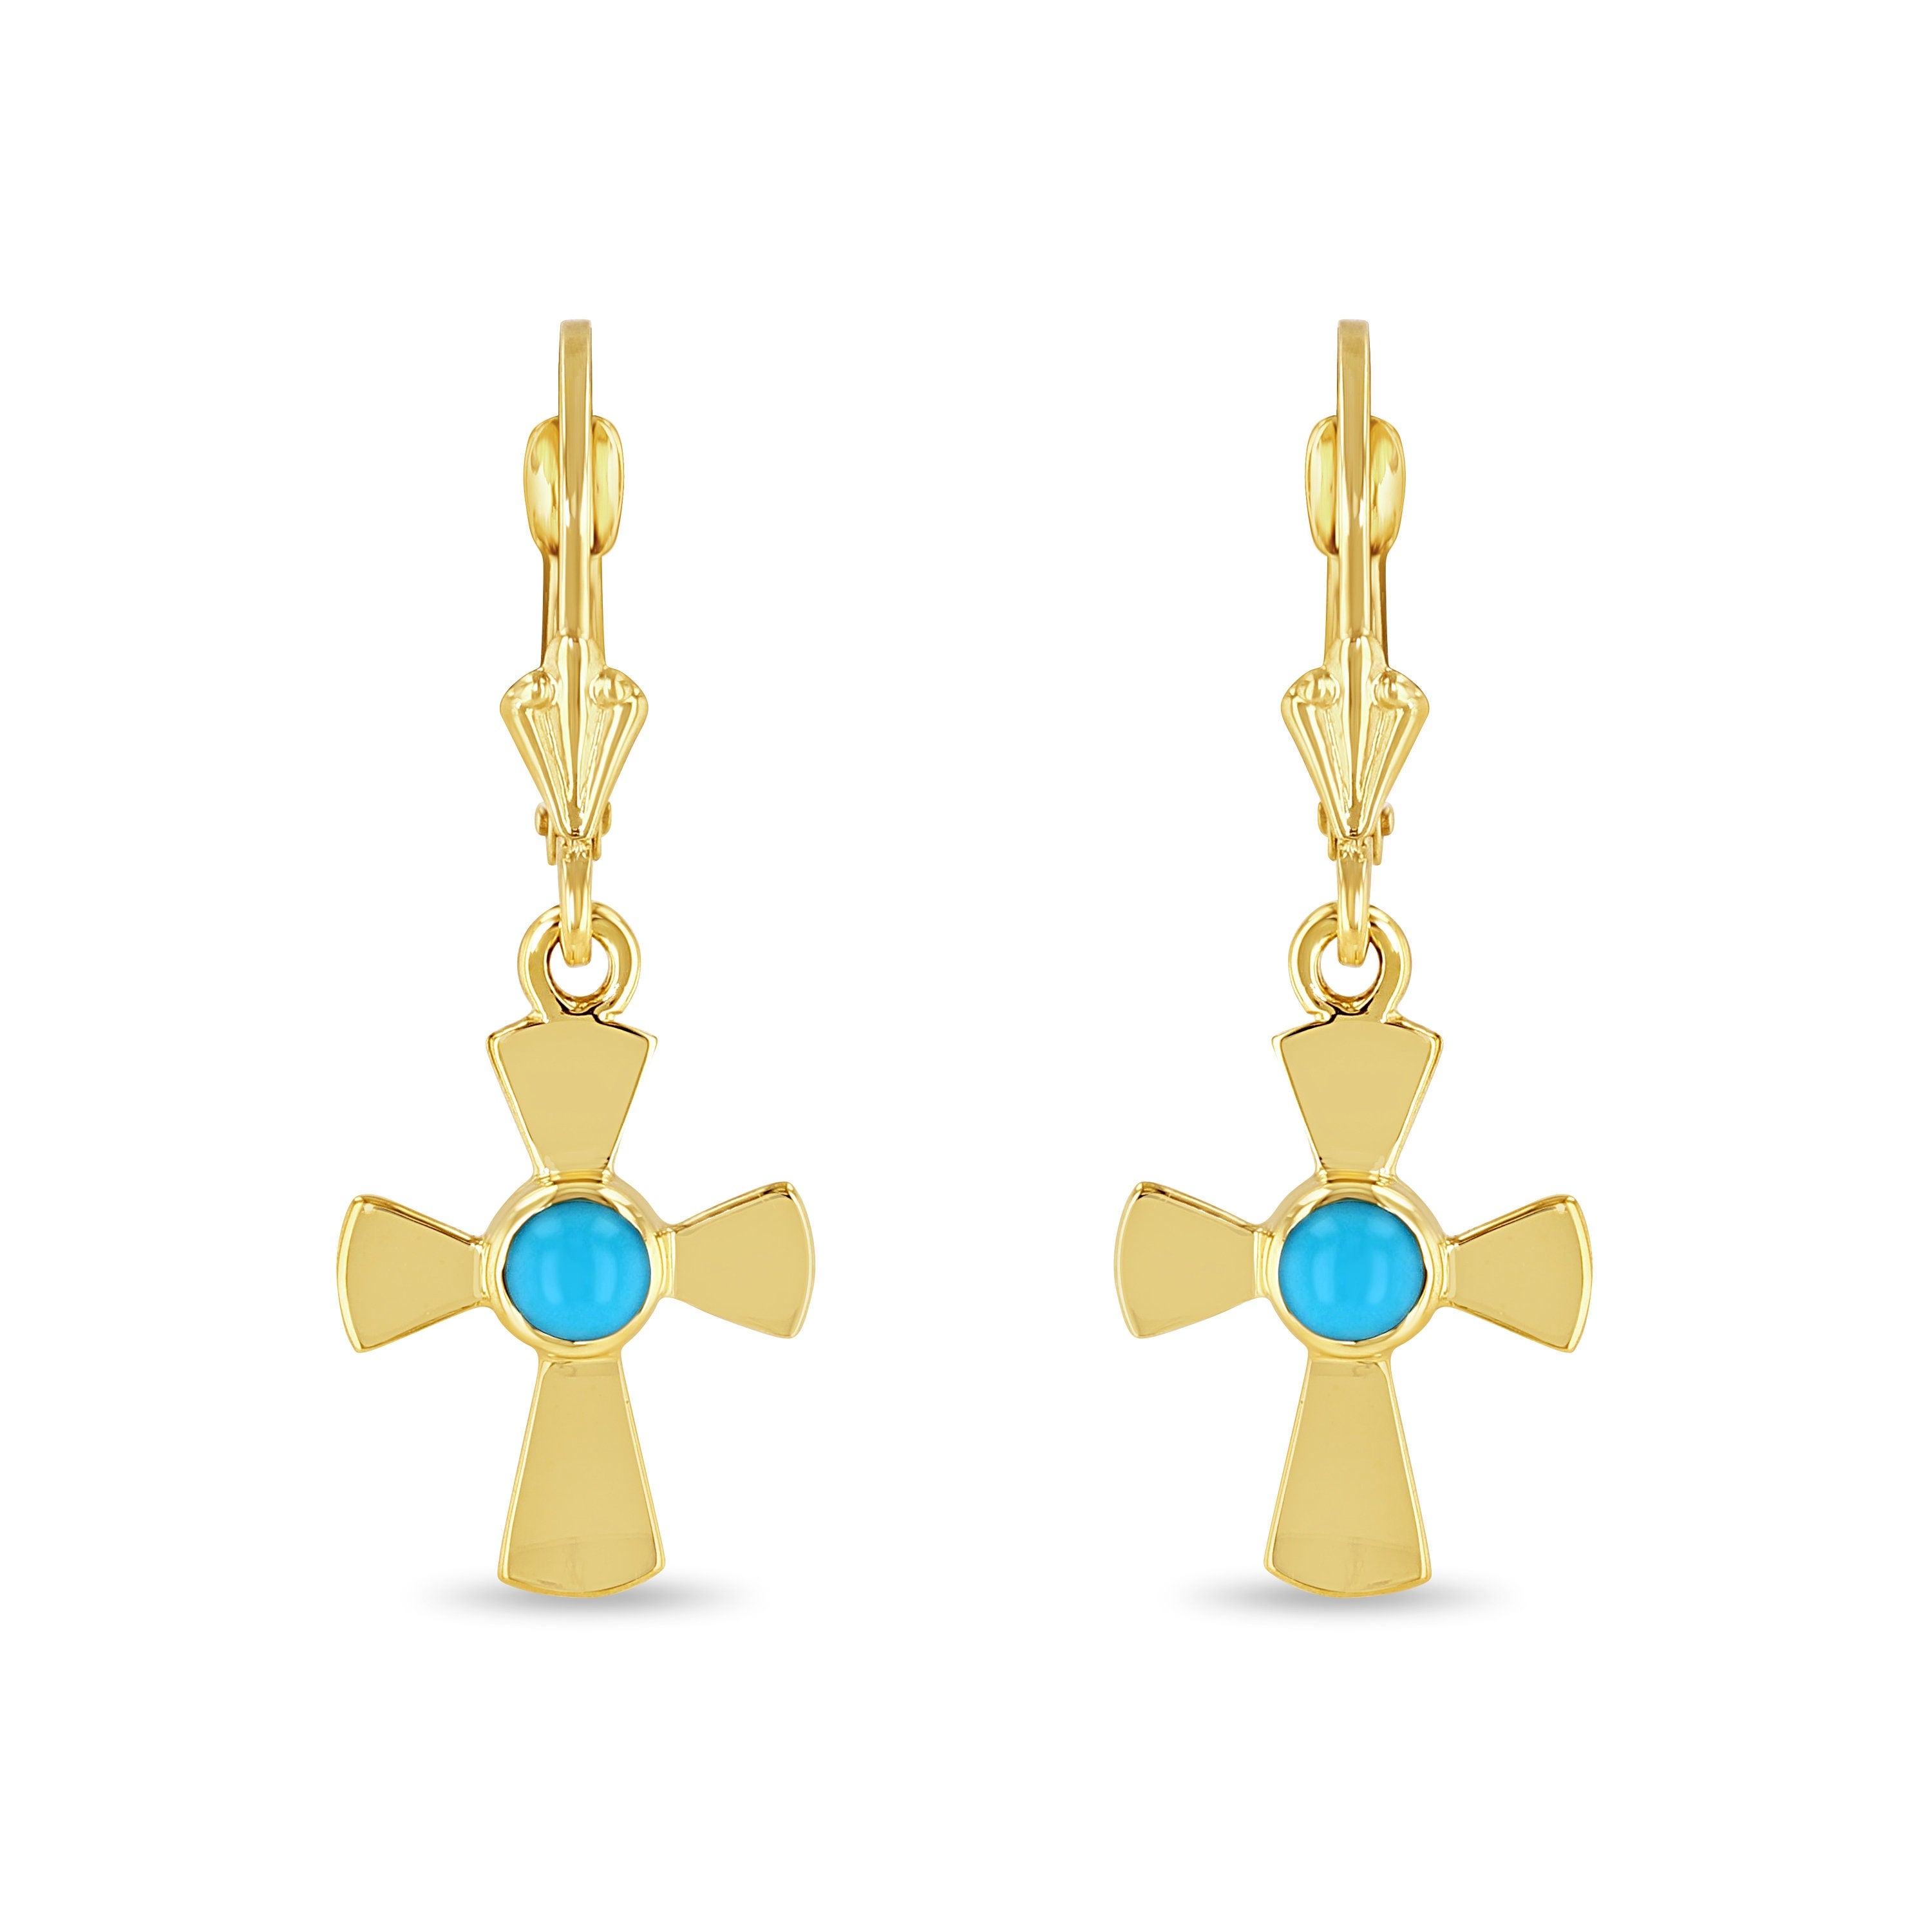 14k solid gold Cross earrings on lever backs with turquoise stones